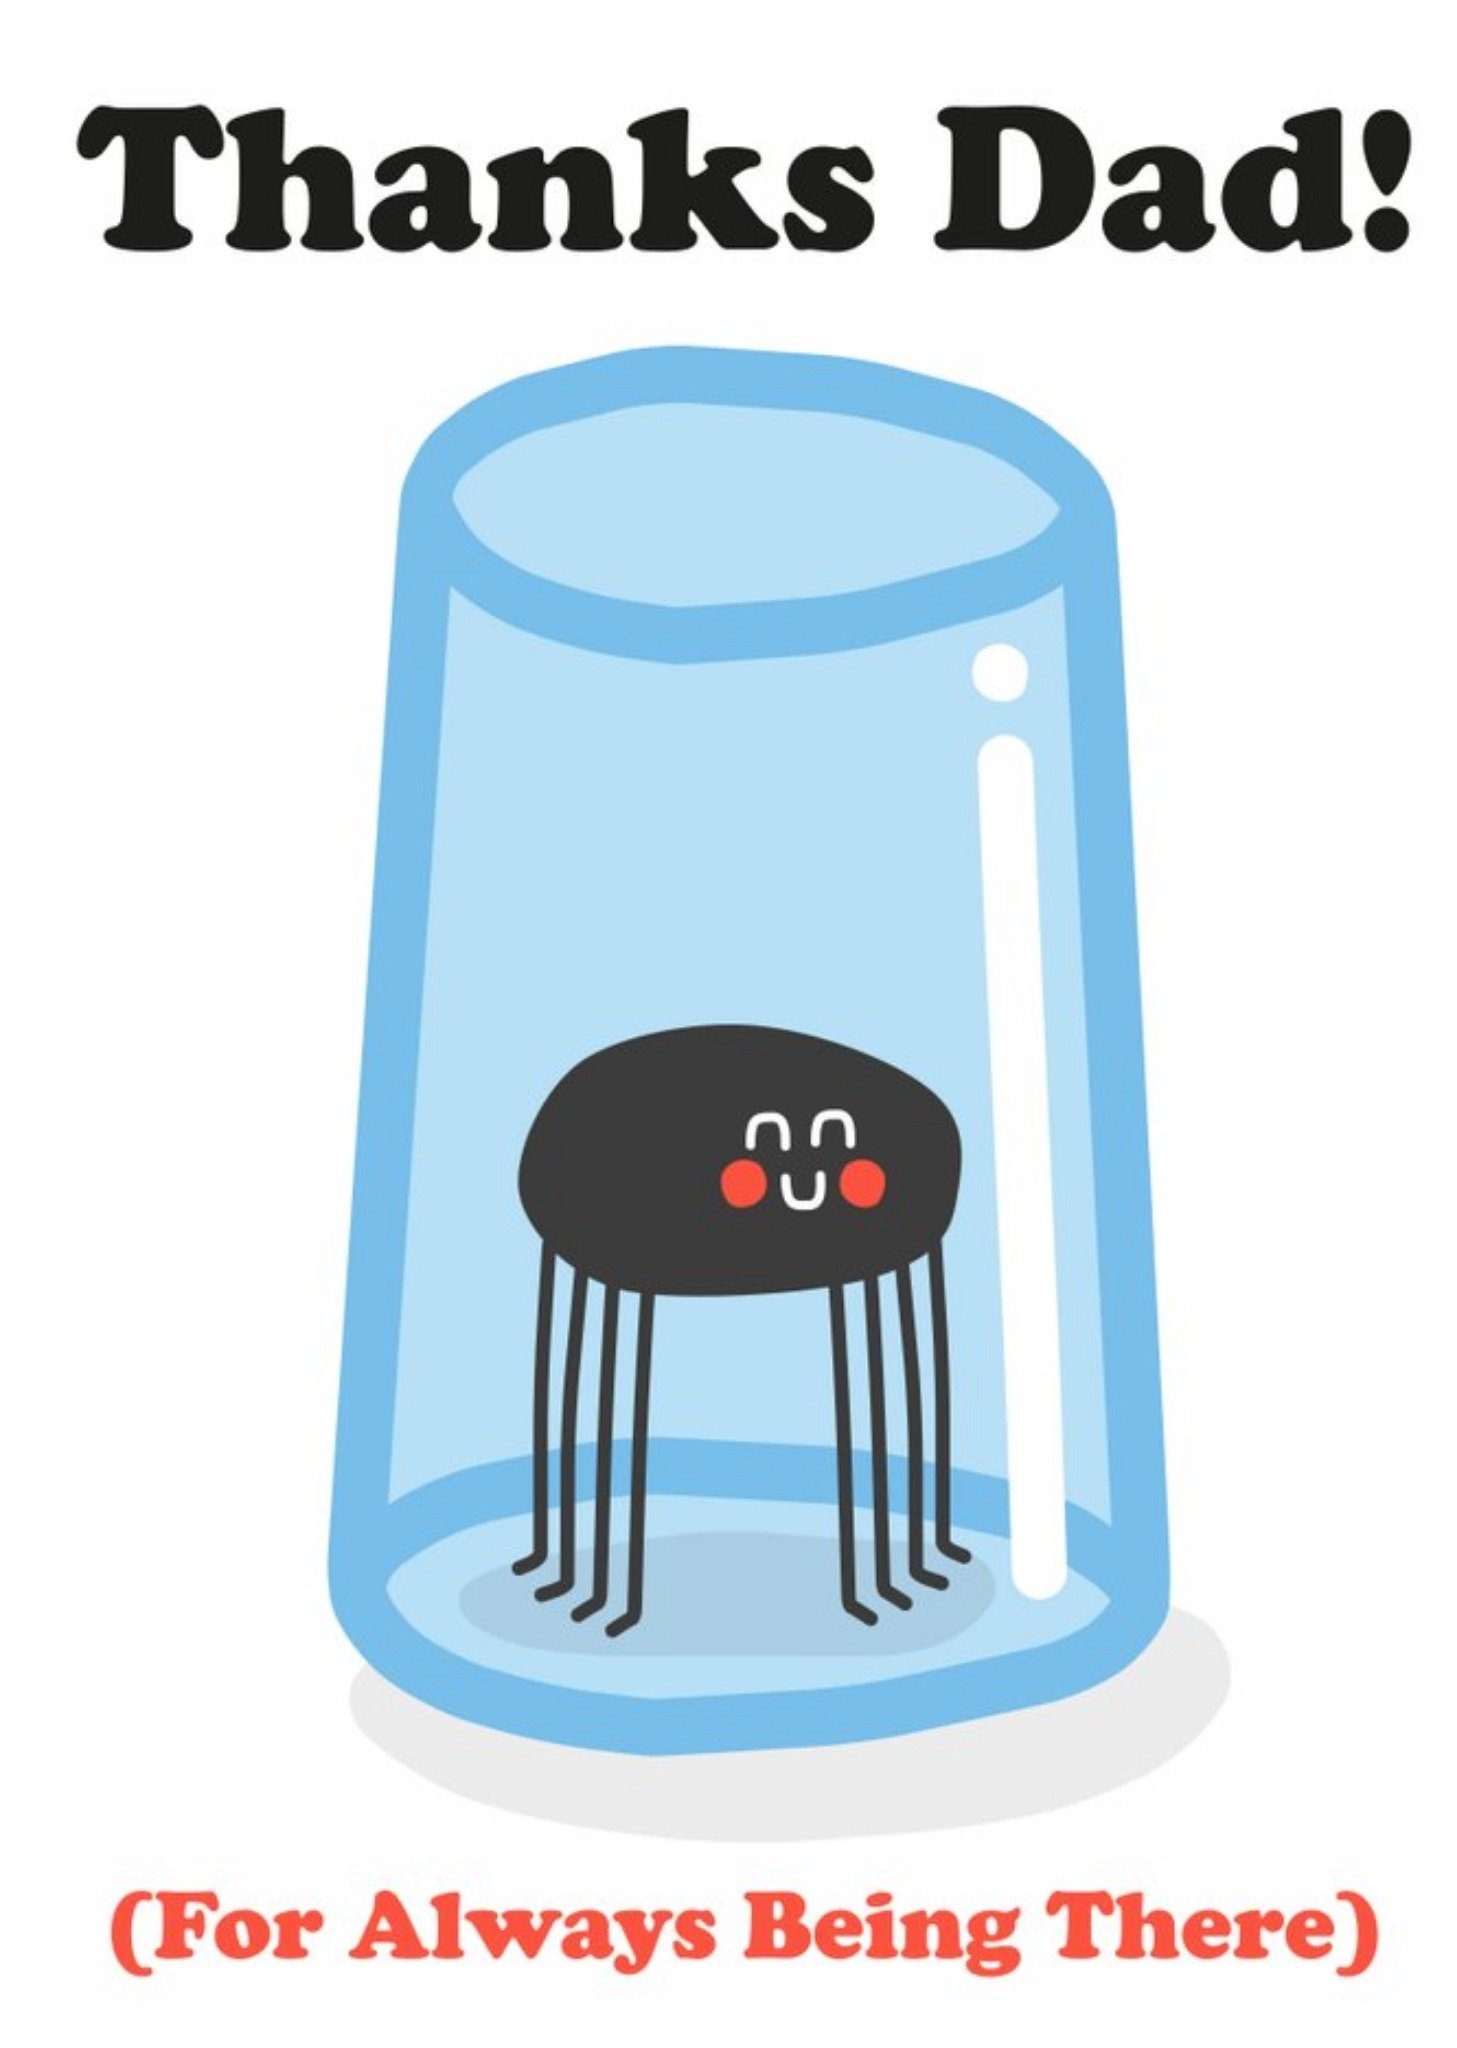 Moonpig Illustration Of A Captured Spider In A Glass Thanks Dad Card, Large